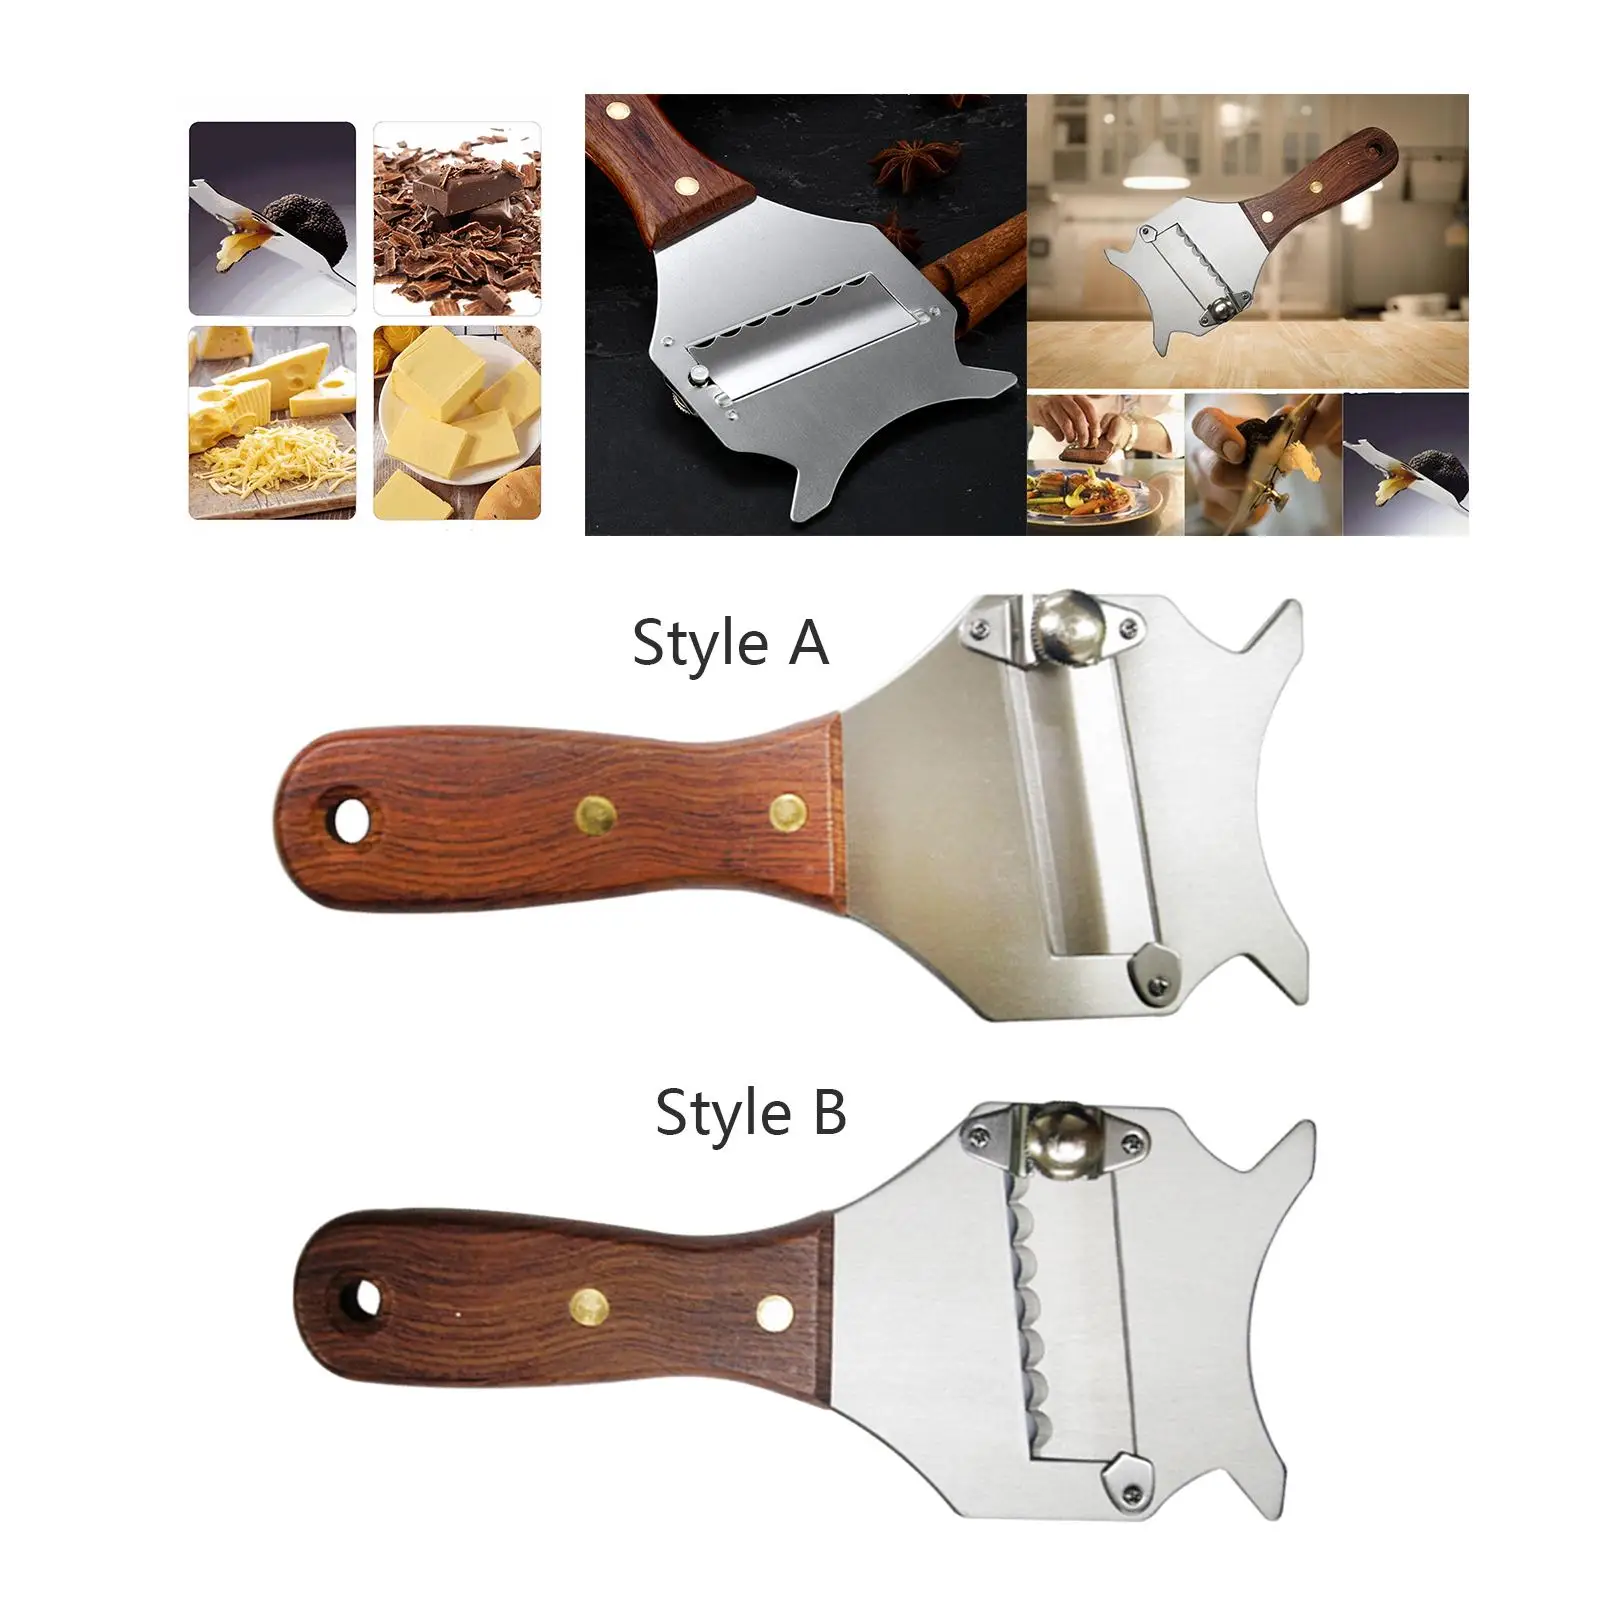 Professional Cheese Chocolate Slicer with Wood Handle Household Baking Tools